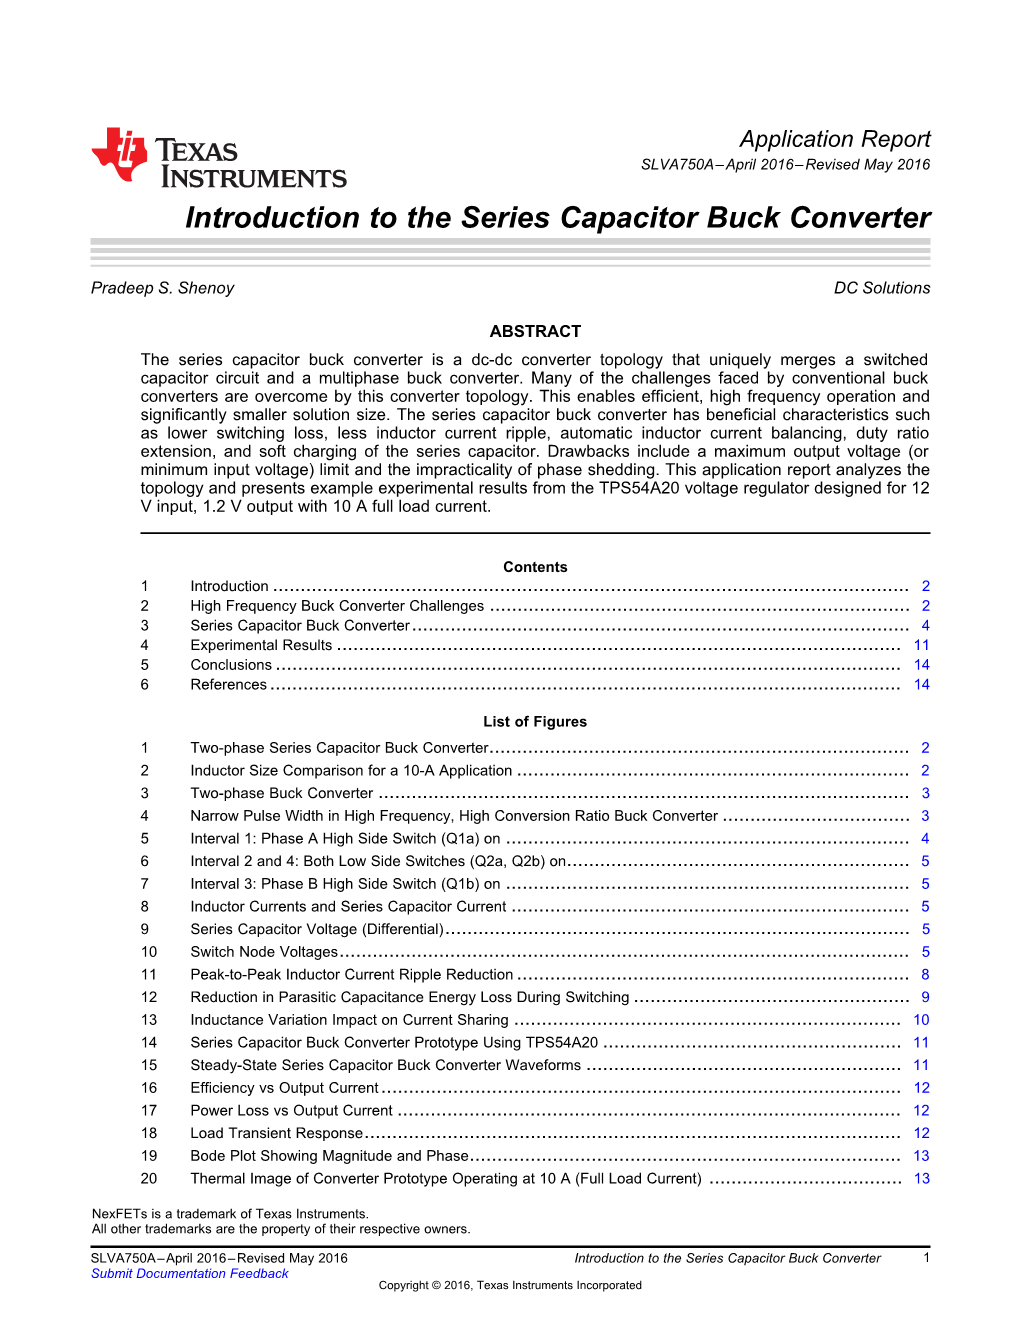 Introduction to the Series Capacitor Buck Converter